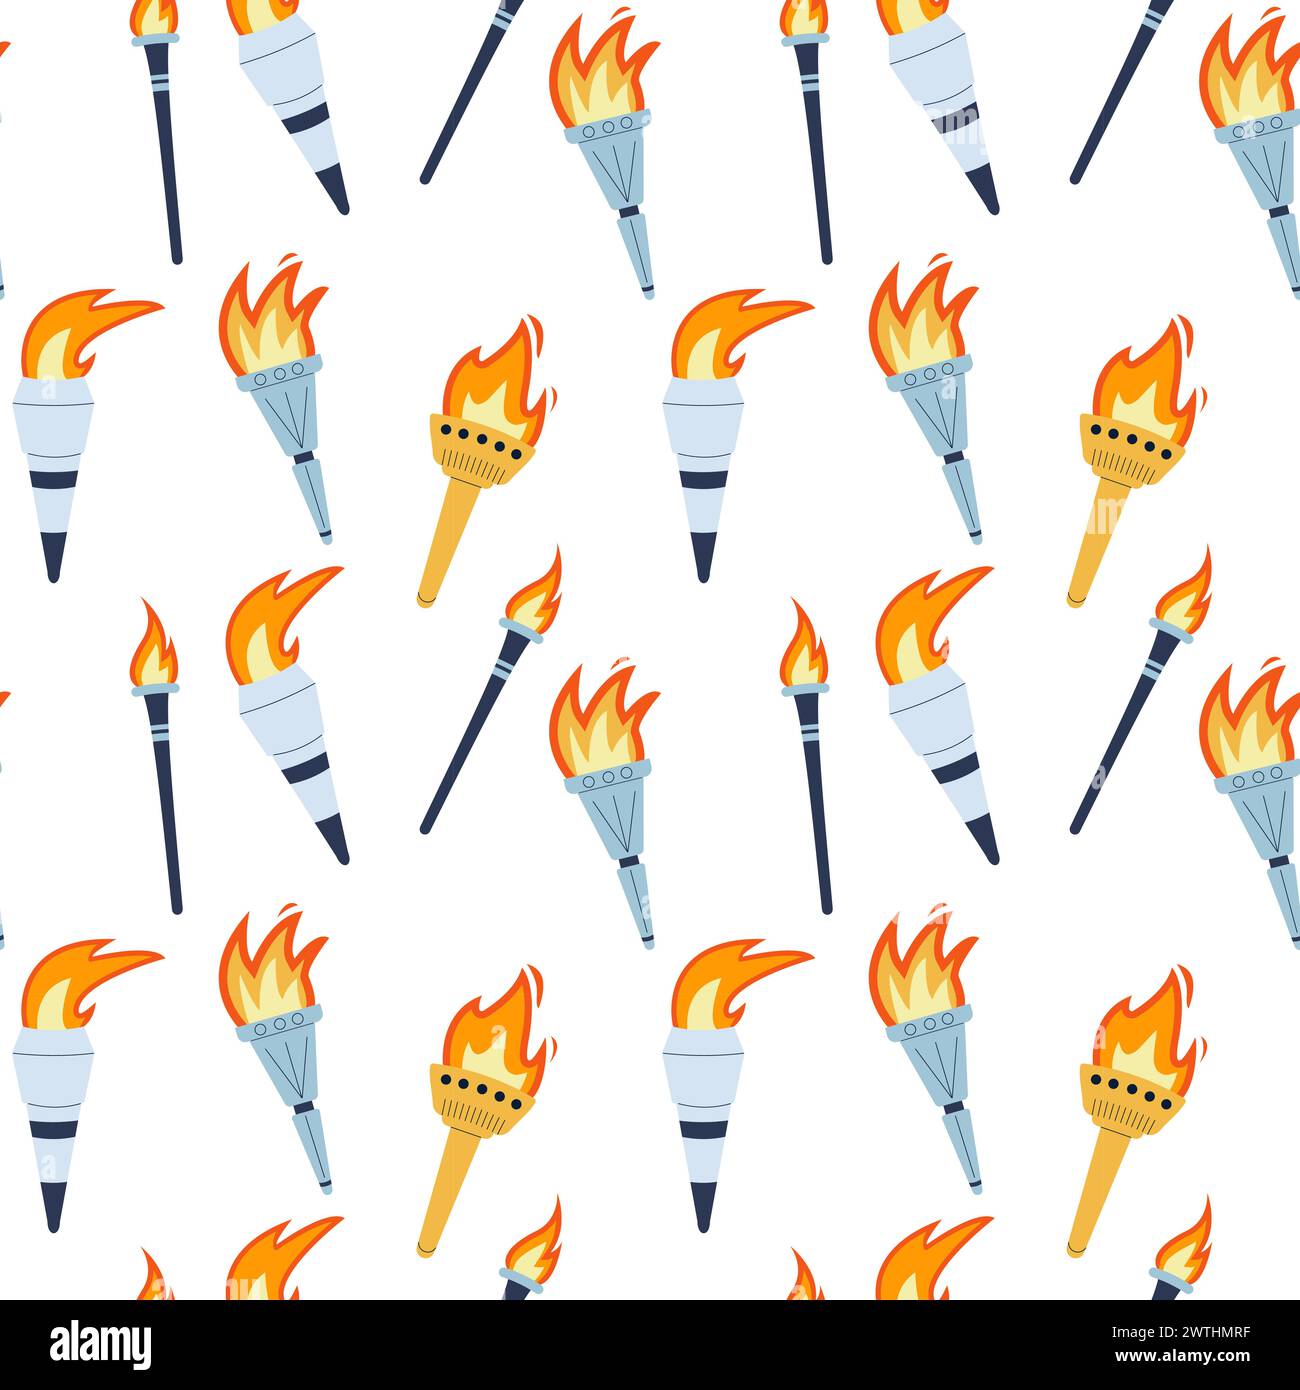 Torches with burning flame seamless pattern. Symbol of sport, games, victory and champion competition endless background. Vector flat illustration rep Stock Vector